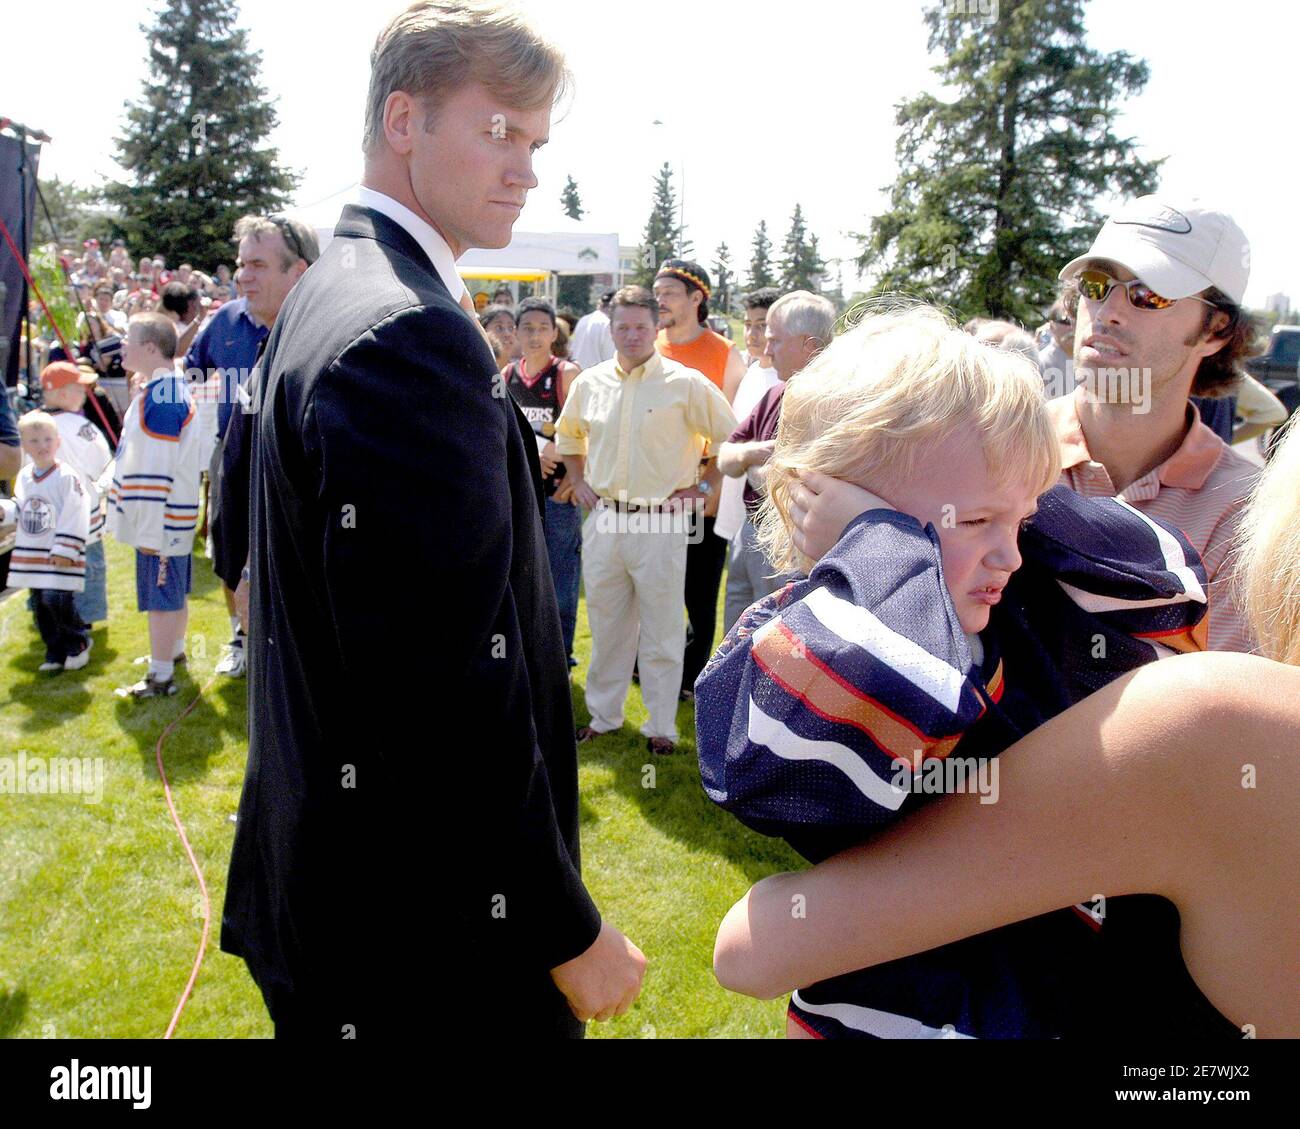 newly-acquired-defenseman-chris-pronger-l-watches-his-son-jack-pronger-3-cover-his-ears-from-the-noise-of-hundreds-of-screaming-fans-outside-the-edmonton-oilers-offices-during-a-news-conference-in-edmonton-canada-august-5-2005-pronger-and-mike-peca-r-with-sunglasses-received-their-new-team-jerseys-before-answering-reporters-questions-and-mingling-with-fans-prongers-wife-lauren-is-holding-the-child-reutersdan-riedlhuber-drjj-2E7WJX2.jpg